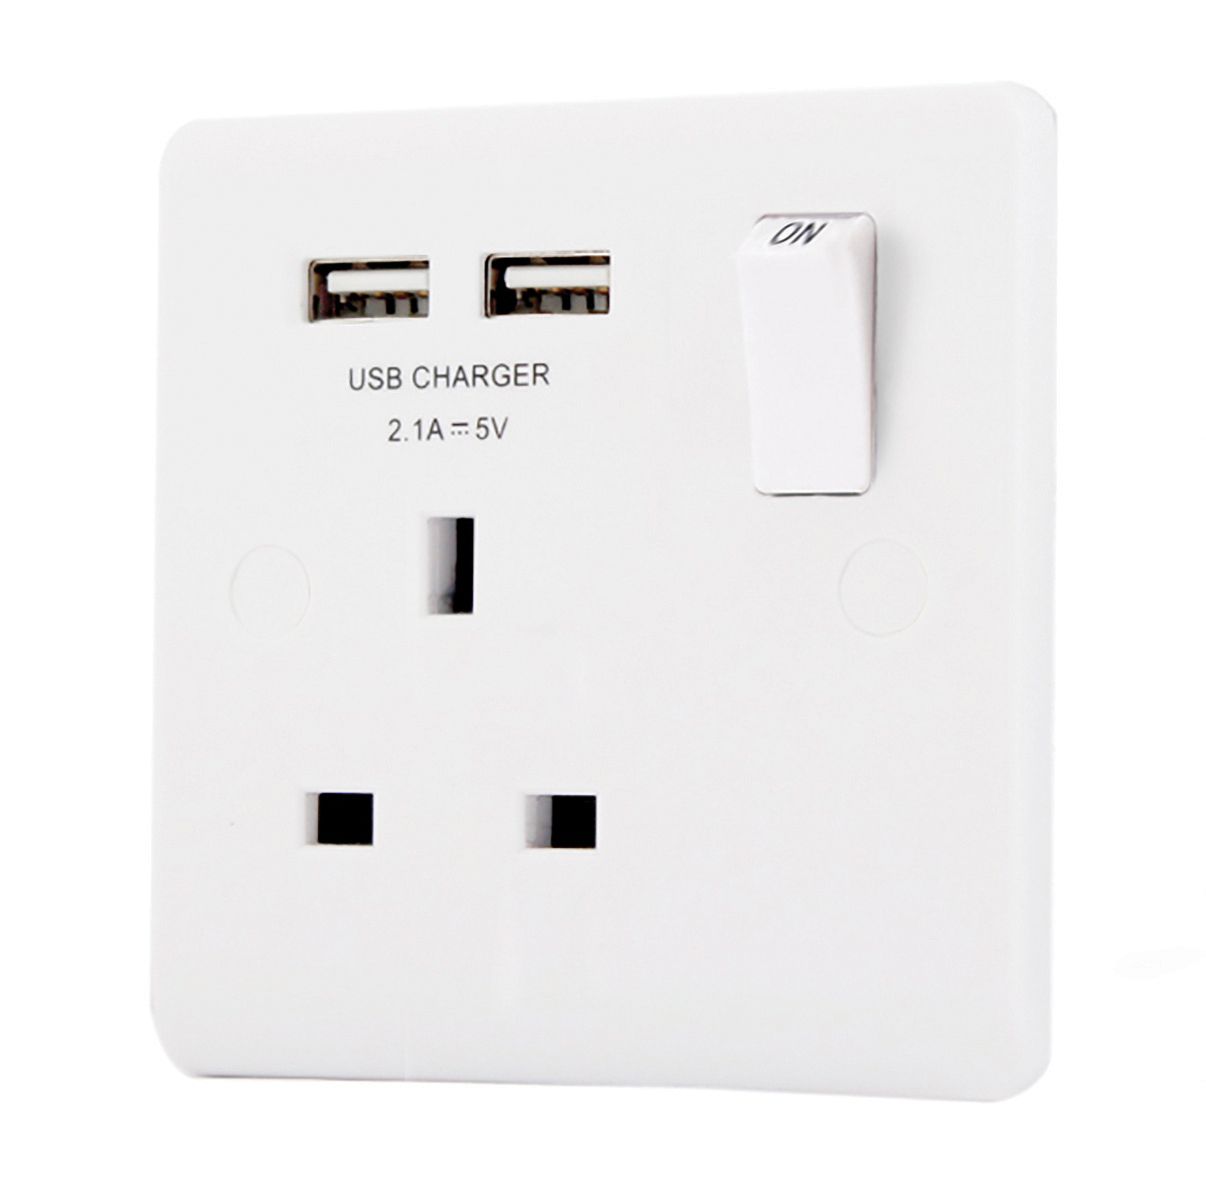 LAP Single 13A Switched Gloss White Socket with USB x2 2.1A